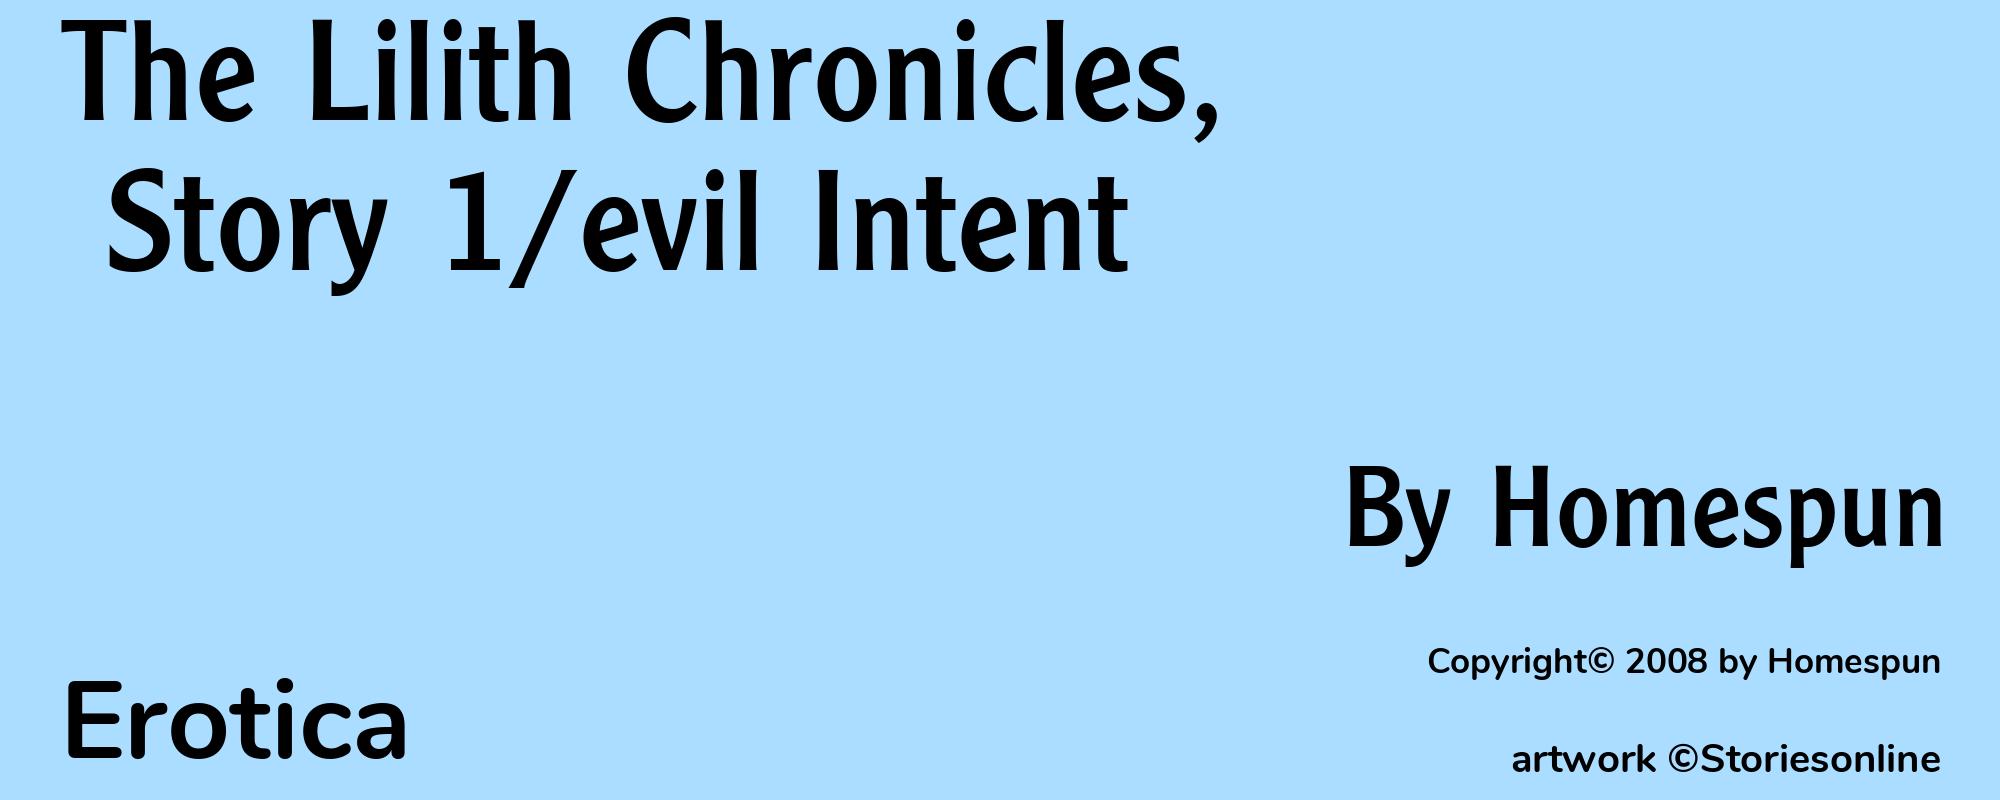 The Lilith Chronicles, Story 1/evil Intent - Cover